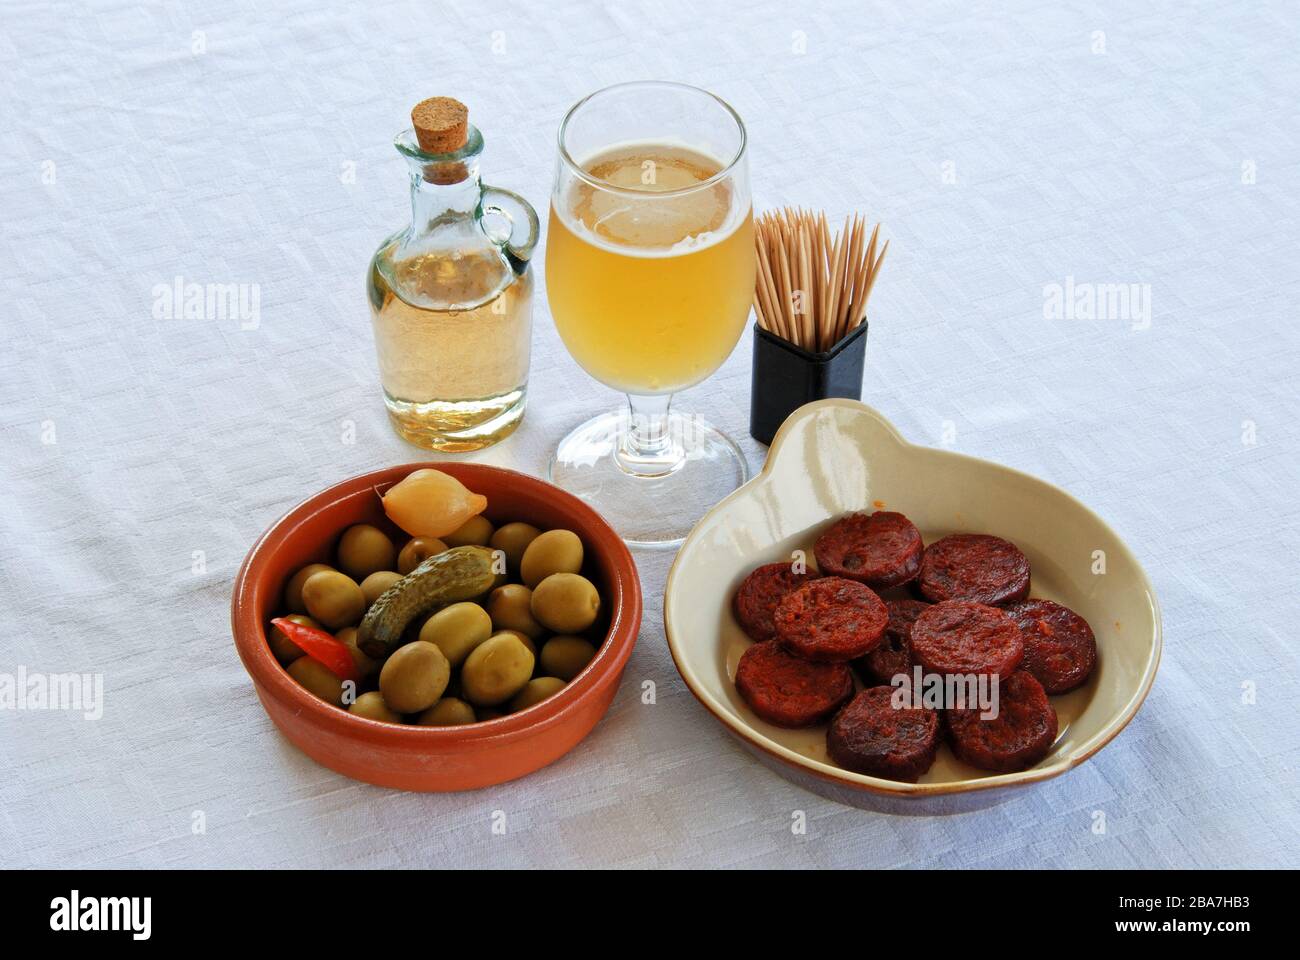 A selection of tapas with beer, Sliced Chorizo sausage and green olive cocktail, Costa del Sol, Malaga Province, Andalucia, Spain, Western Europe. Stock Photo